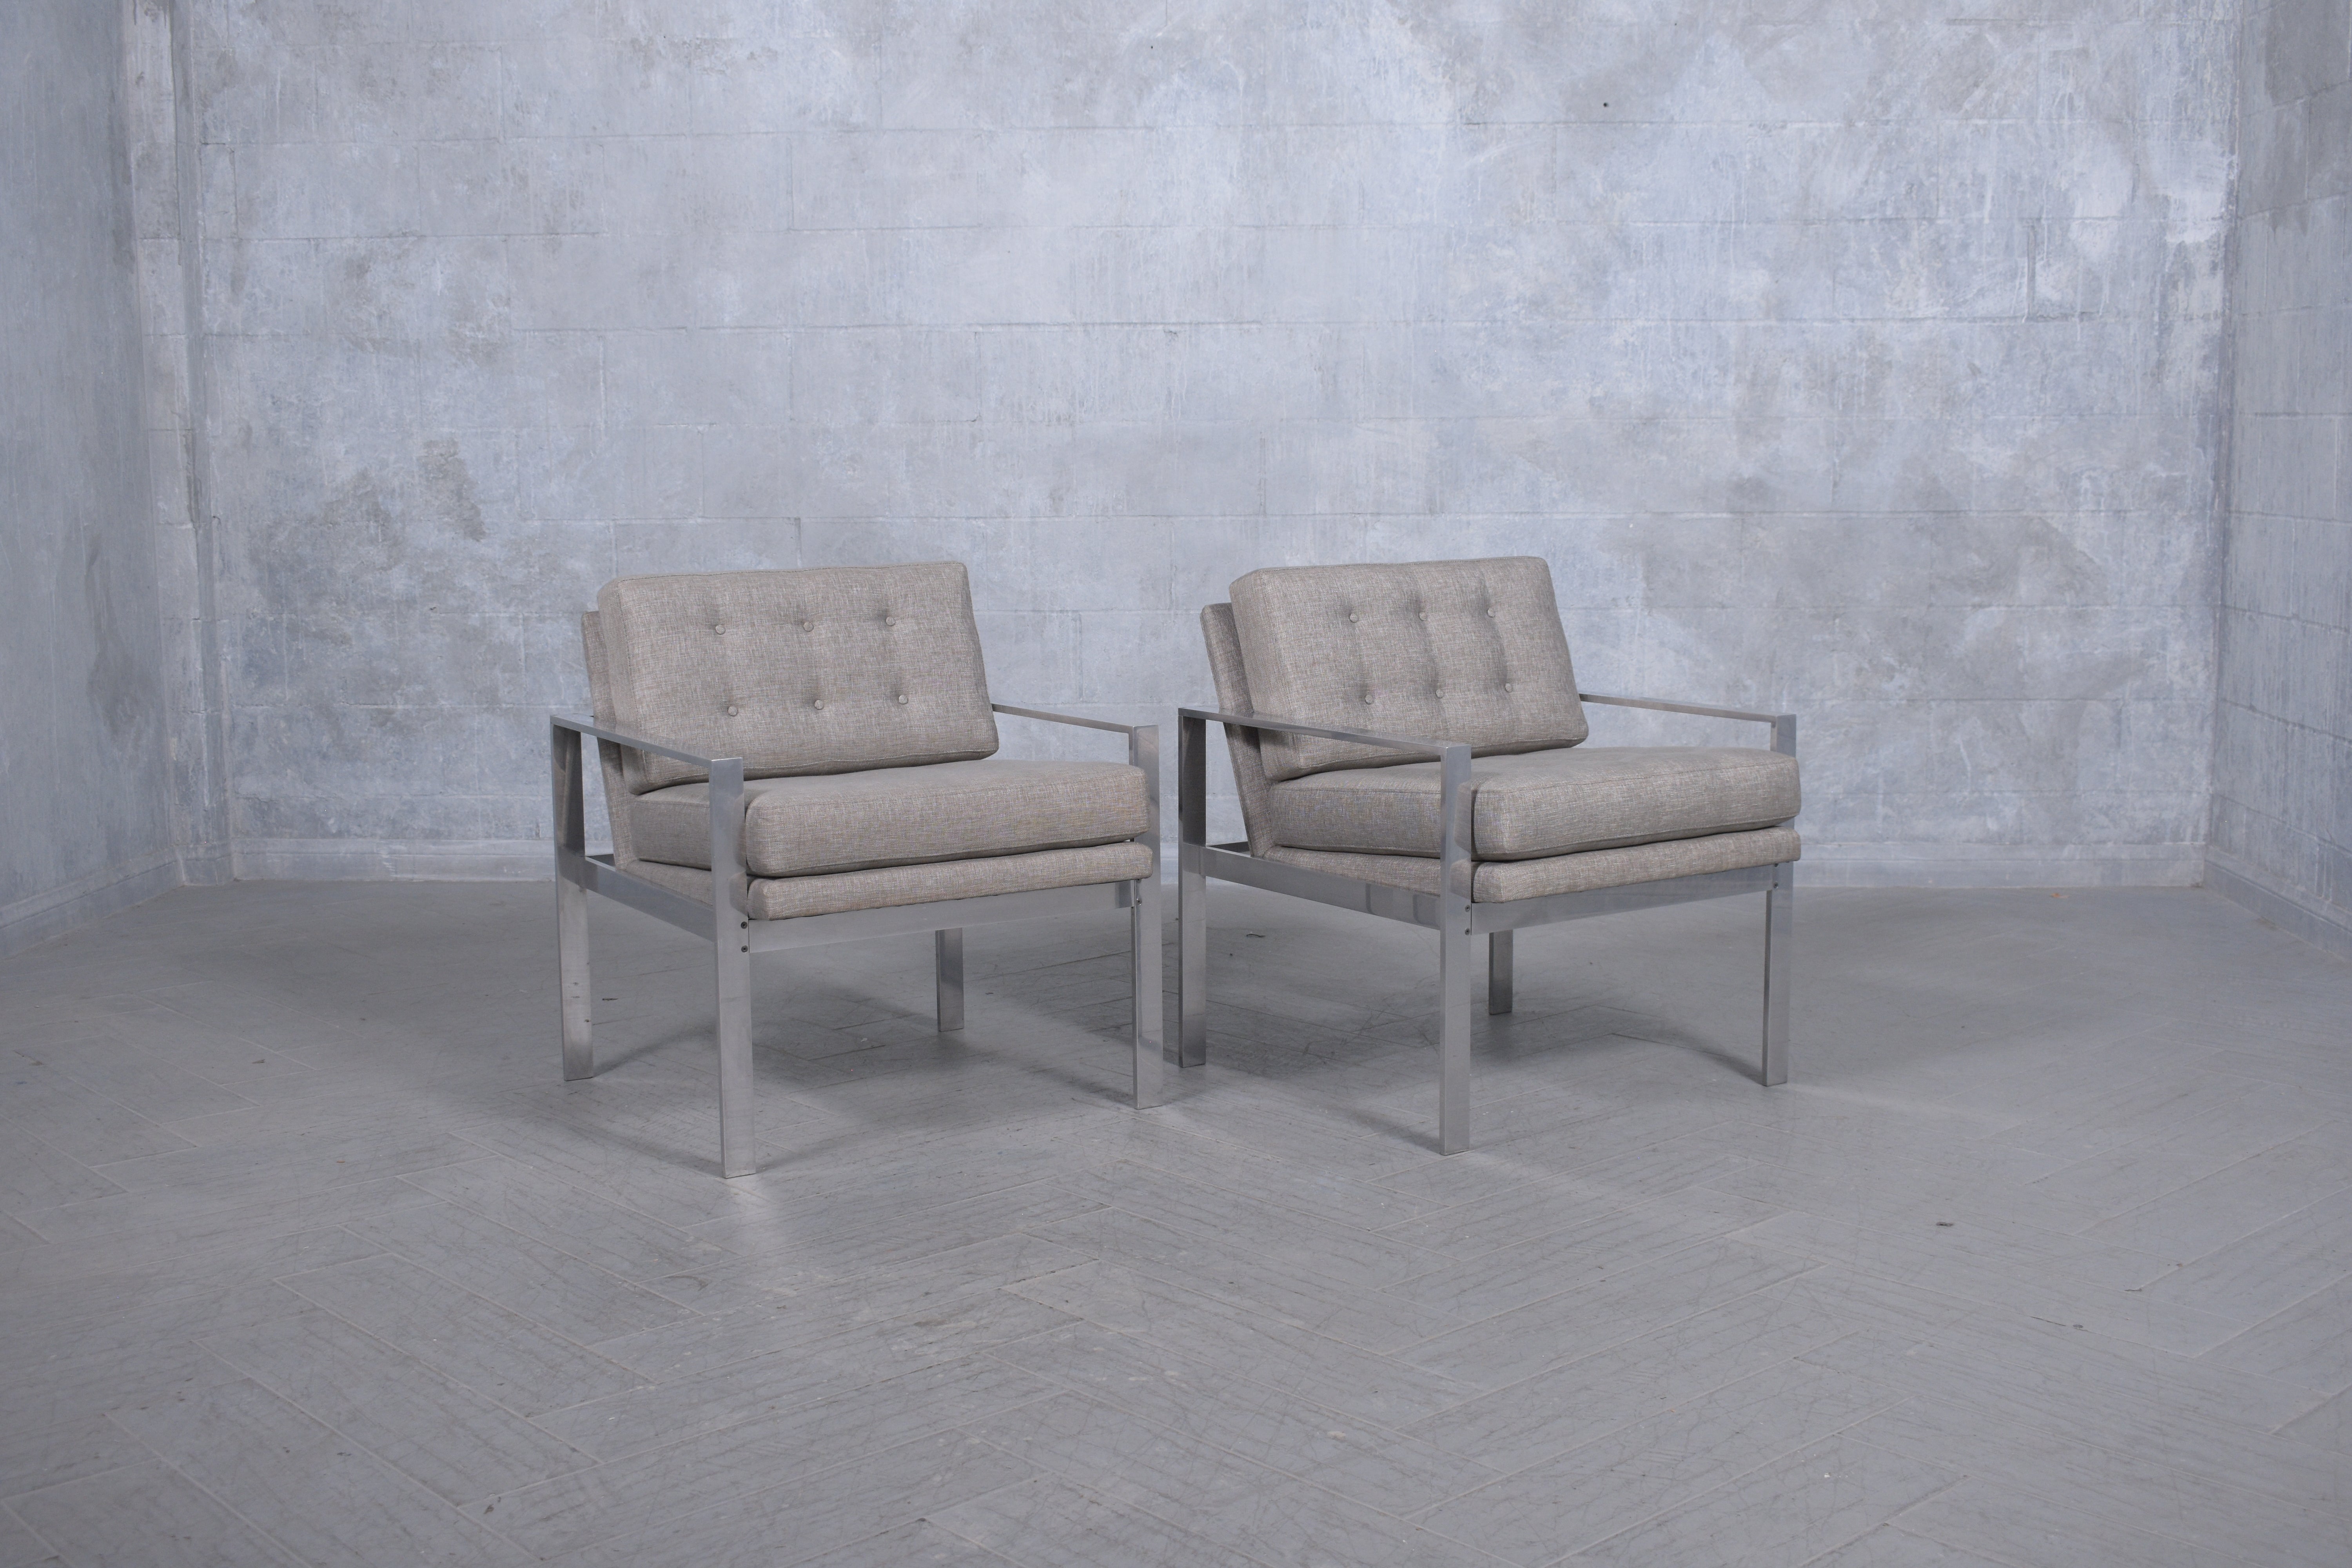 Mid-20th Century Restored Milo Baughman Lounge Chairs with Polished Aluminum Frames For Sale